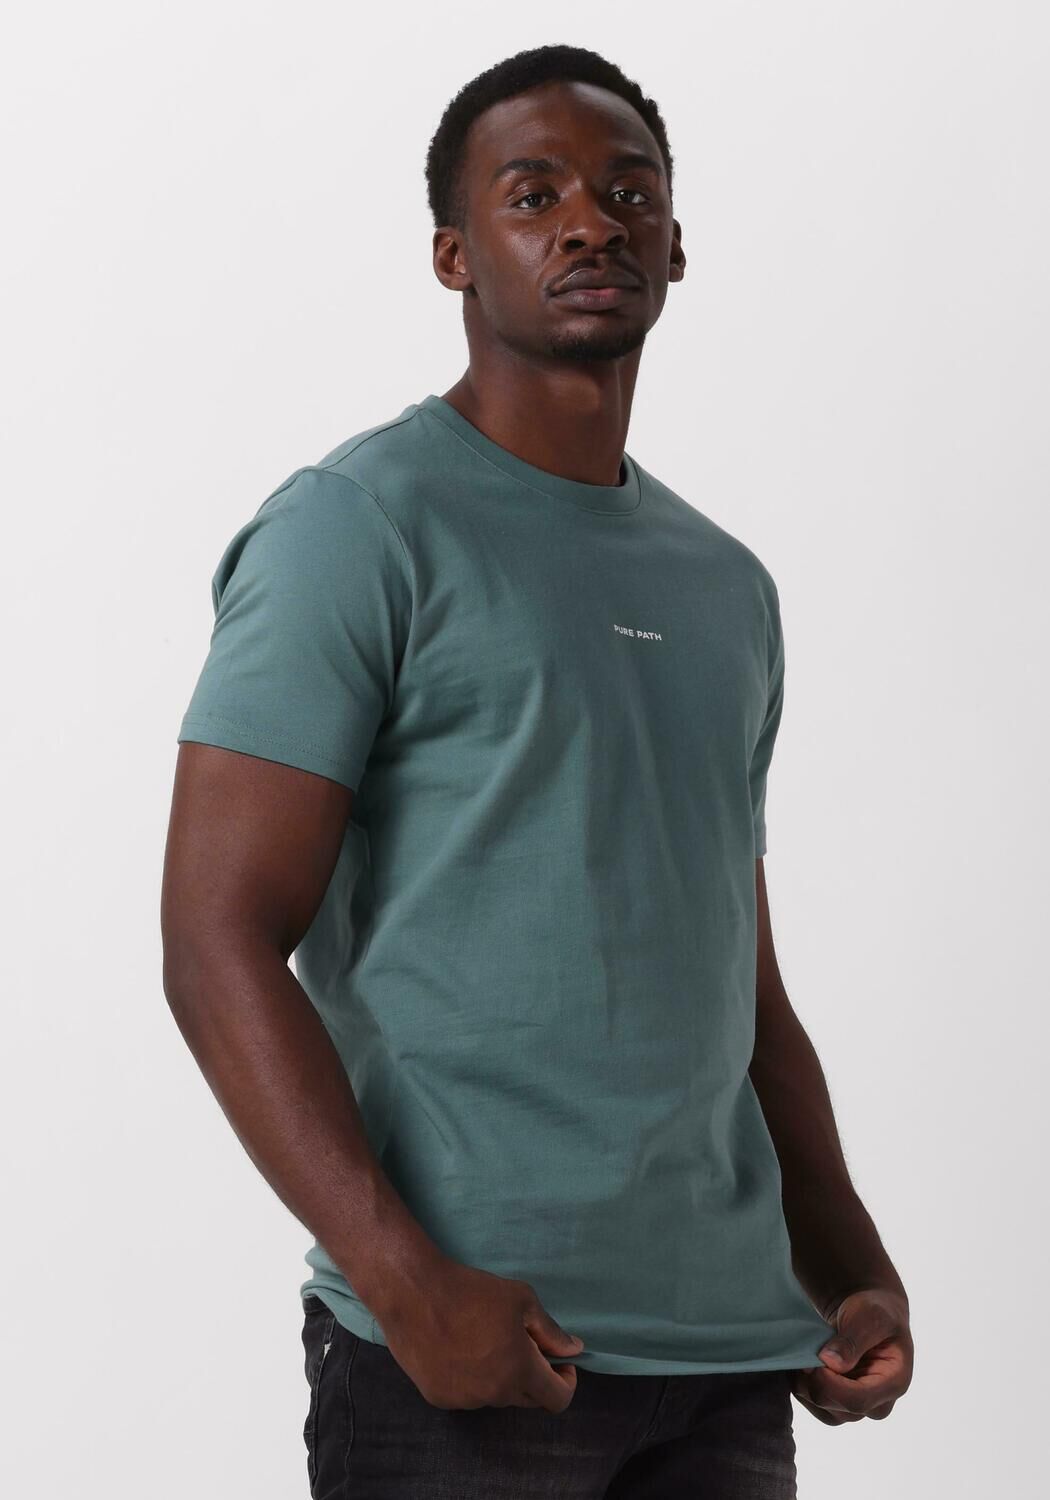 PURE PATH Heren Polo's & T-shirts Tshirt With Front And Back Print Groen